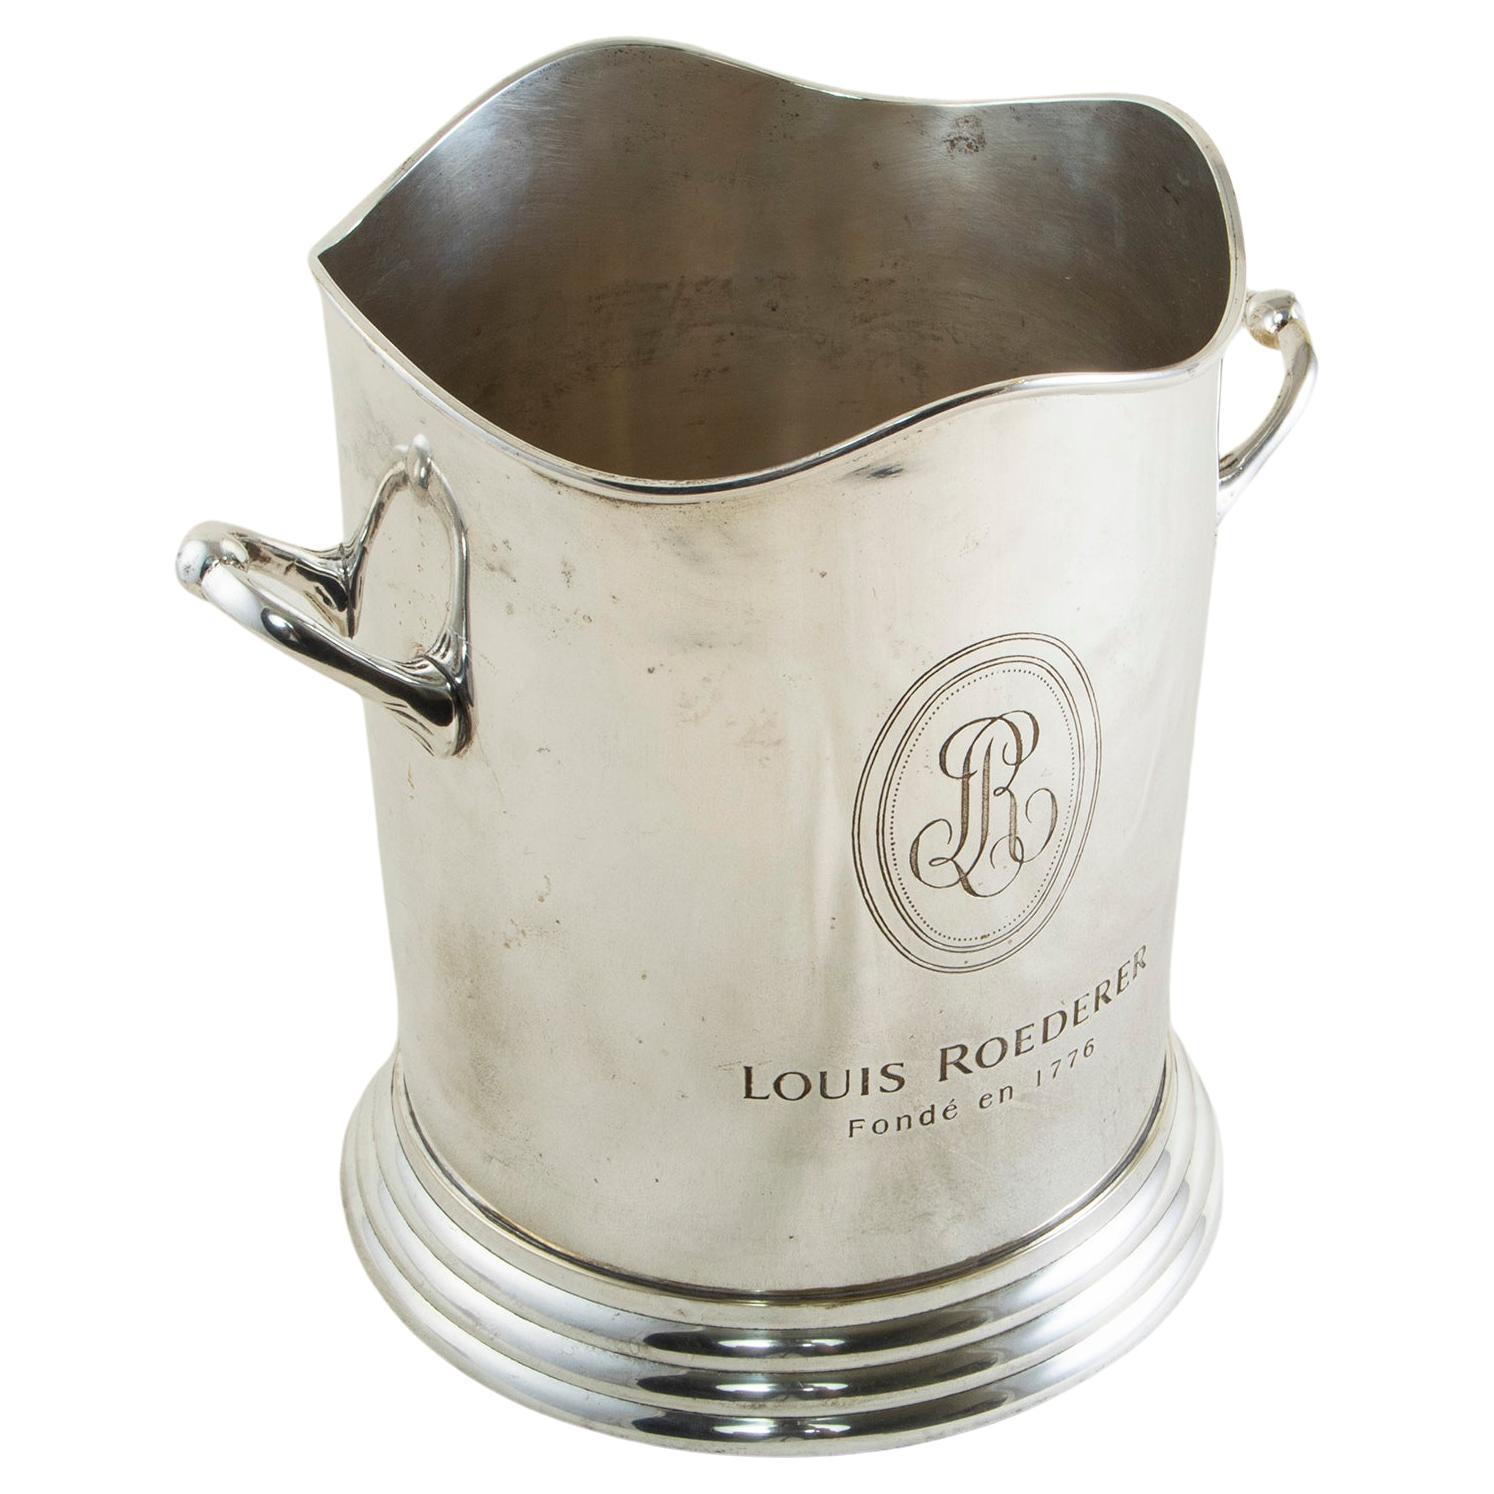 This French silver plate champagne bucket from the mid-20th century is marked on both sides Louis Roederer, Fonde en 1776, the name of the renowned champagne producer and the year of its establishment. A curved rim at the top and tiered footed base